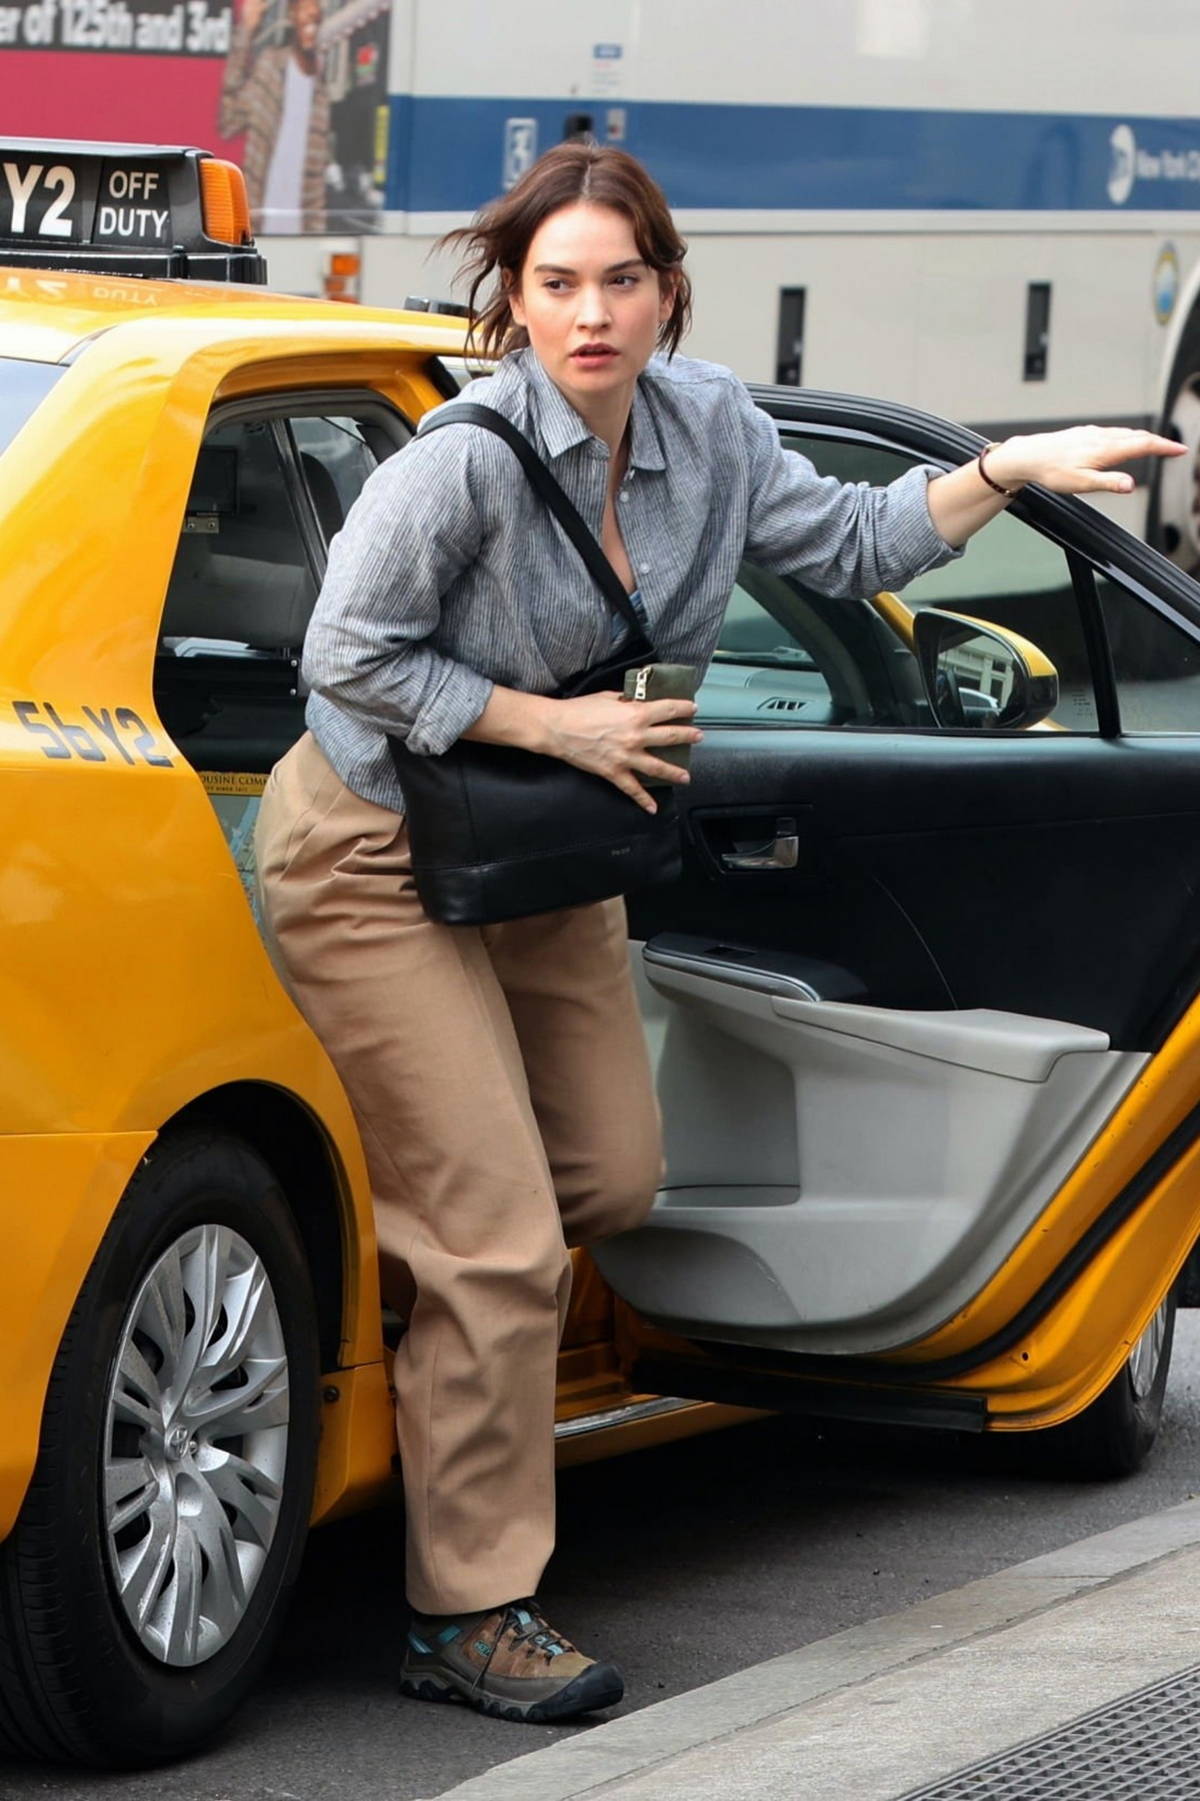 Lily James #LilyJames Catching a Cab in NYC